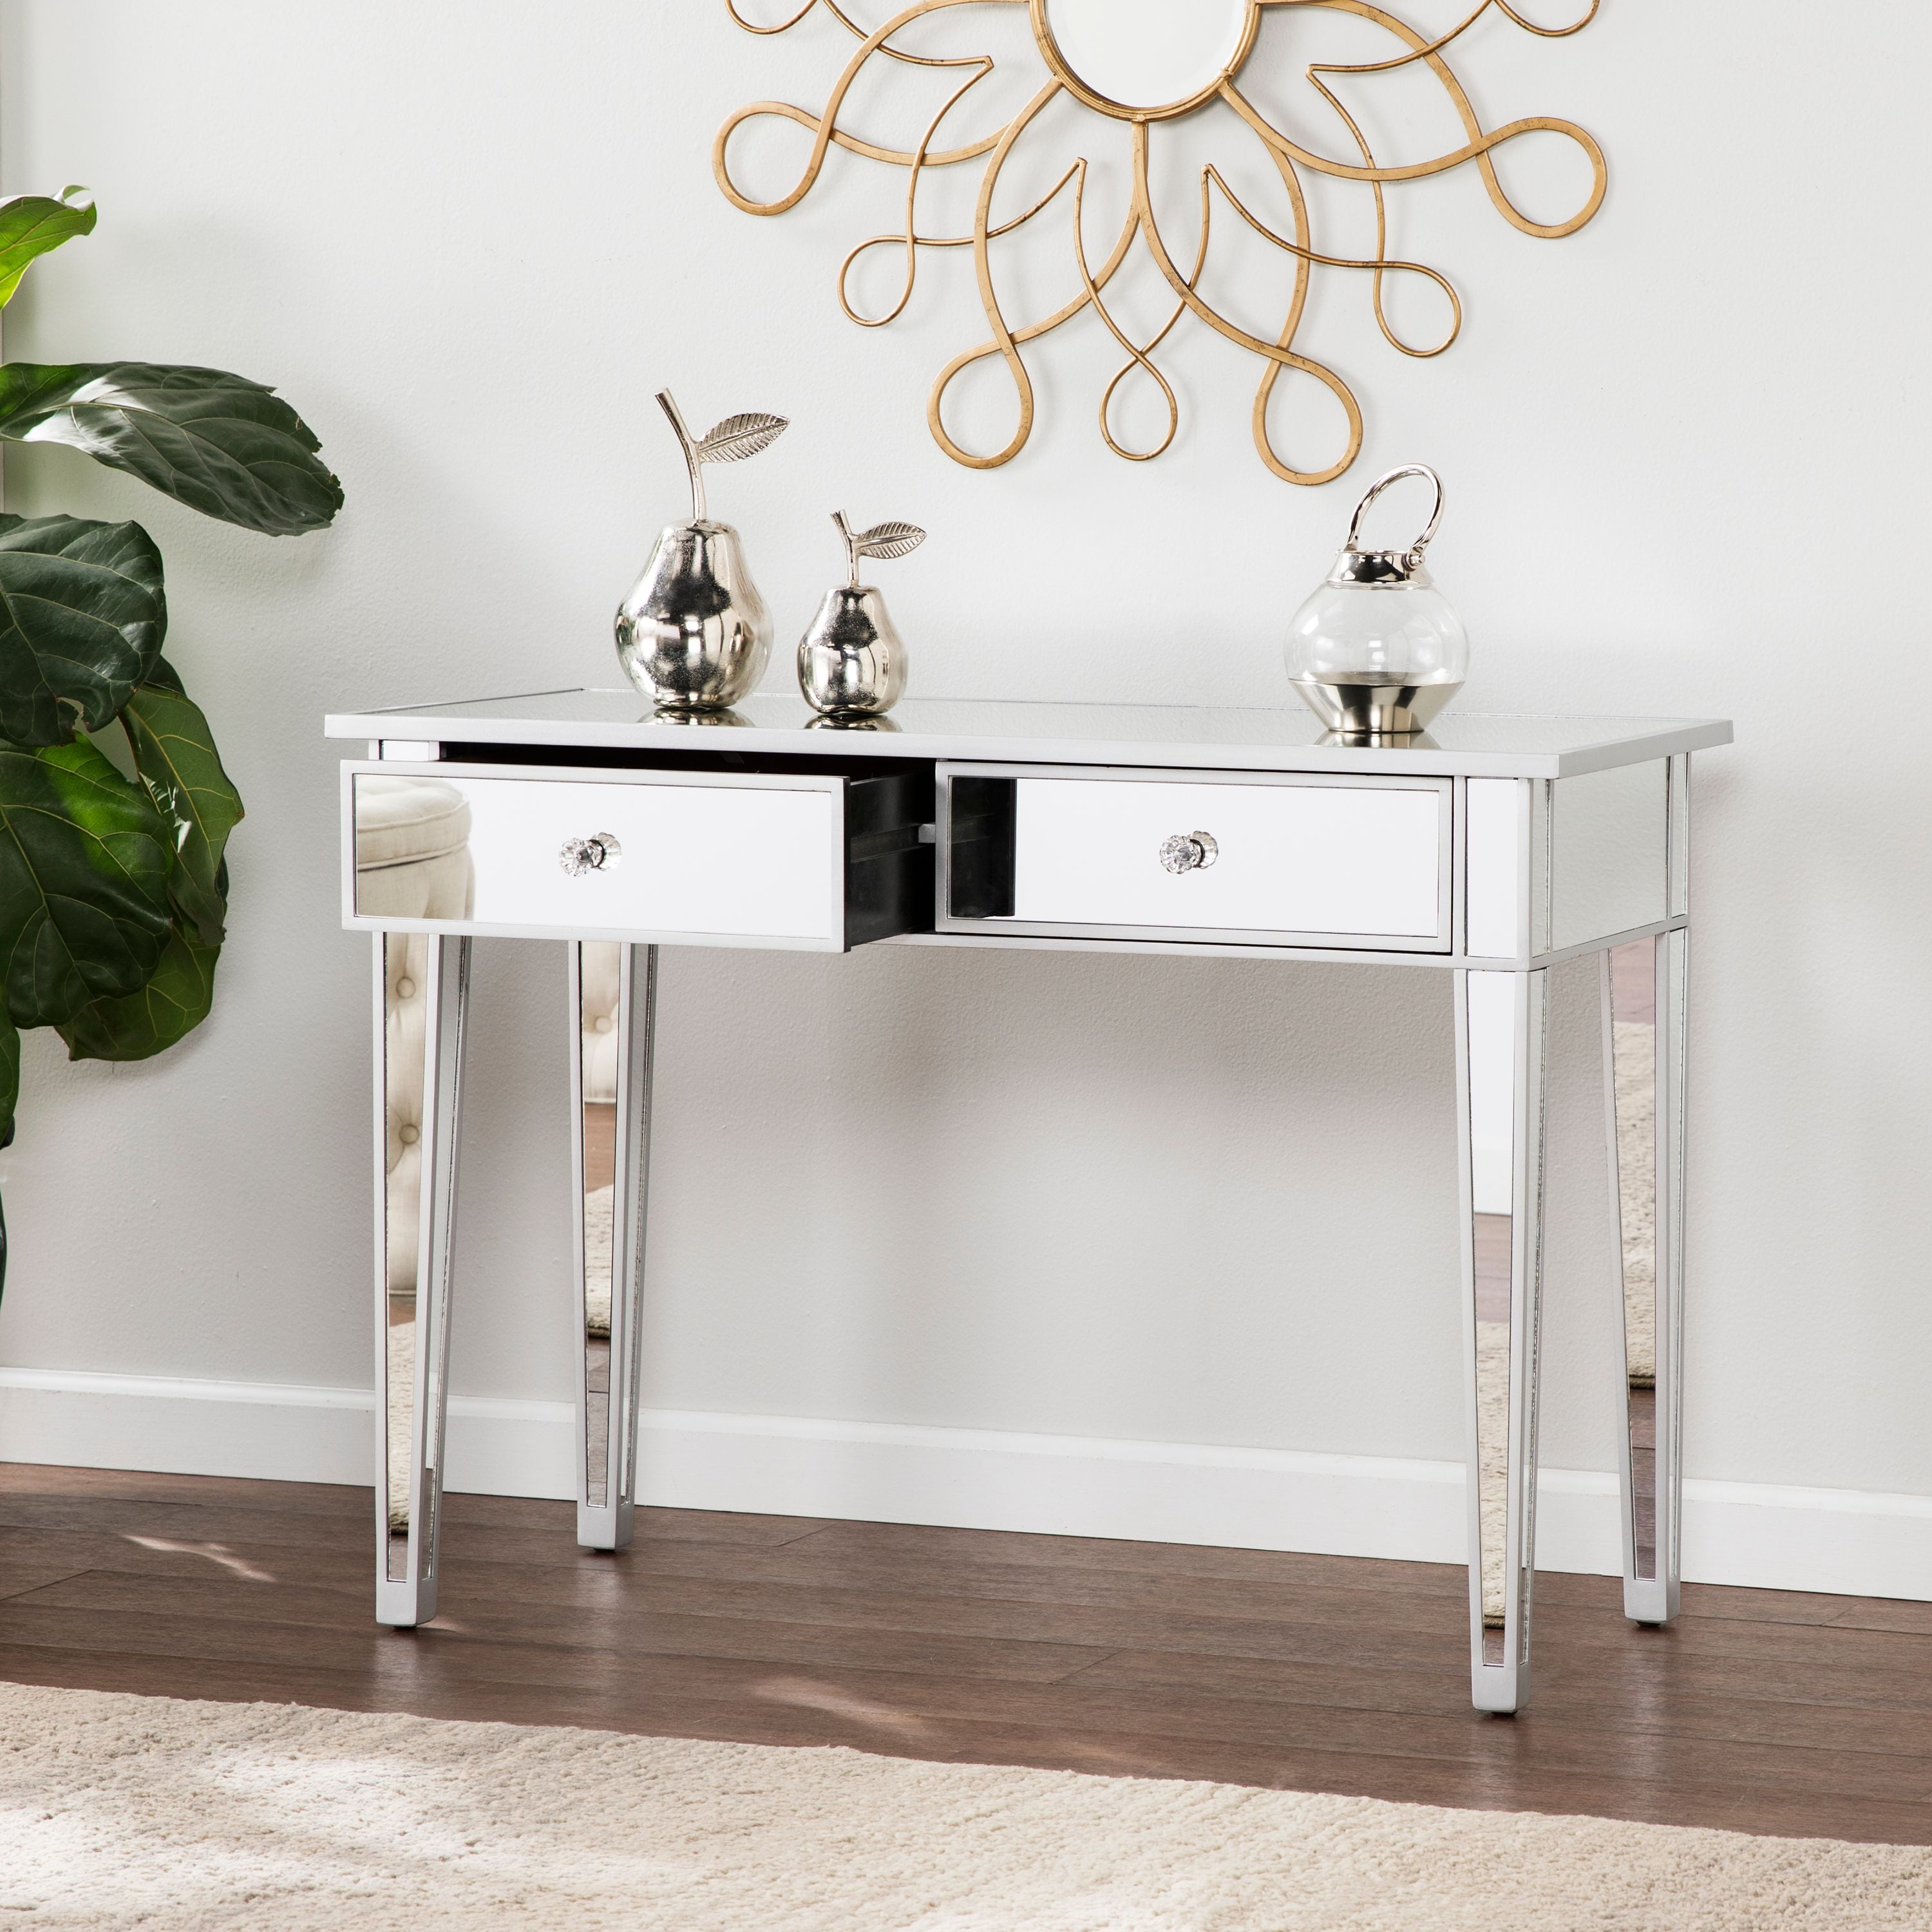 Southern Enterprises Illusions Collection Mirrored Console Table